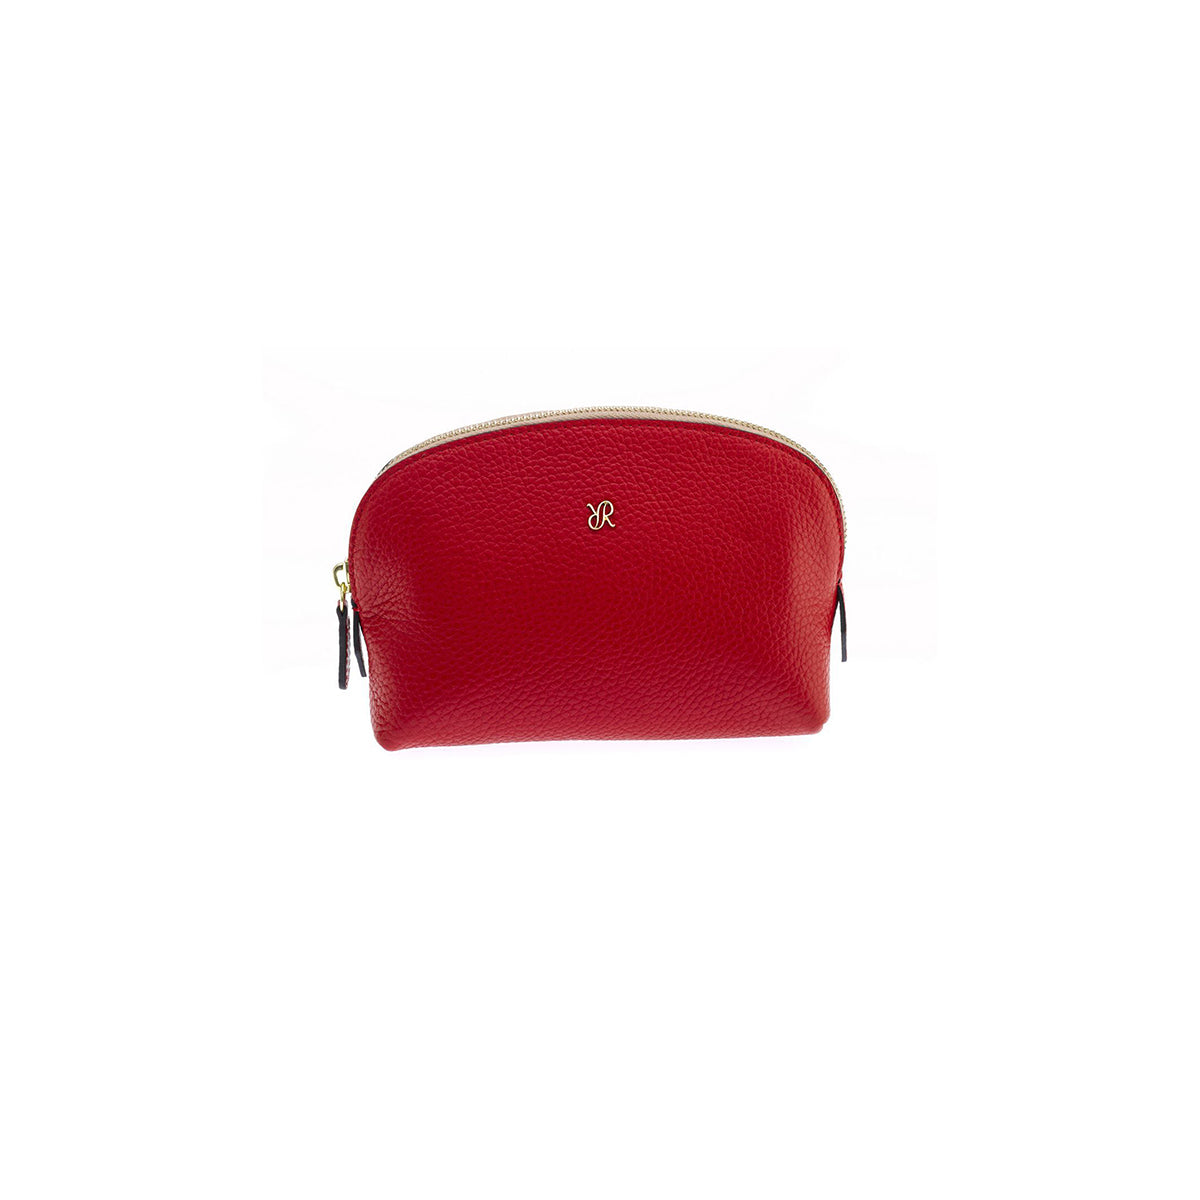 Mini Makeup Bag For Purse - Red Pouch - Coin Purse Wallet For Women - Red